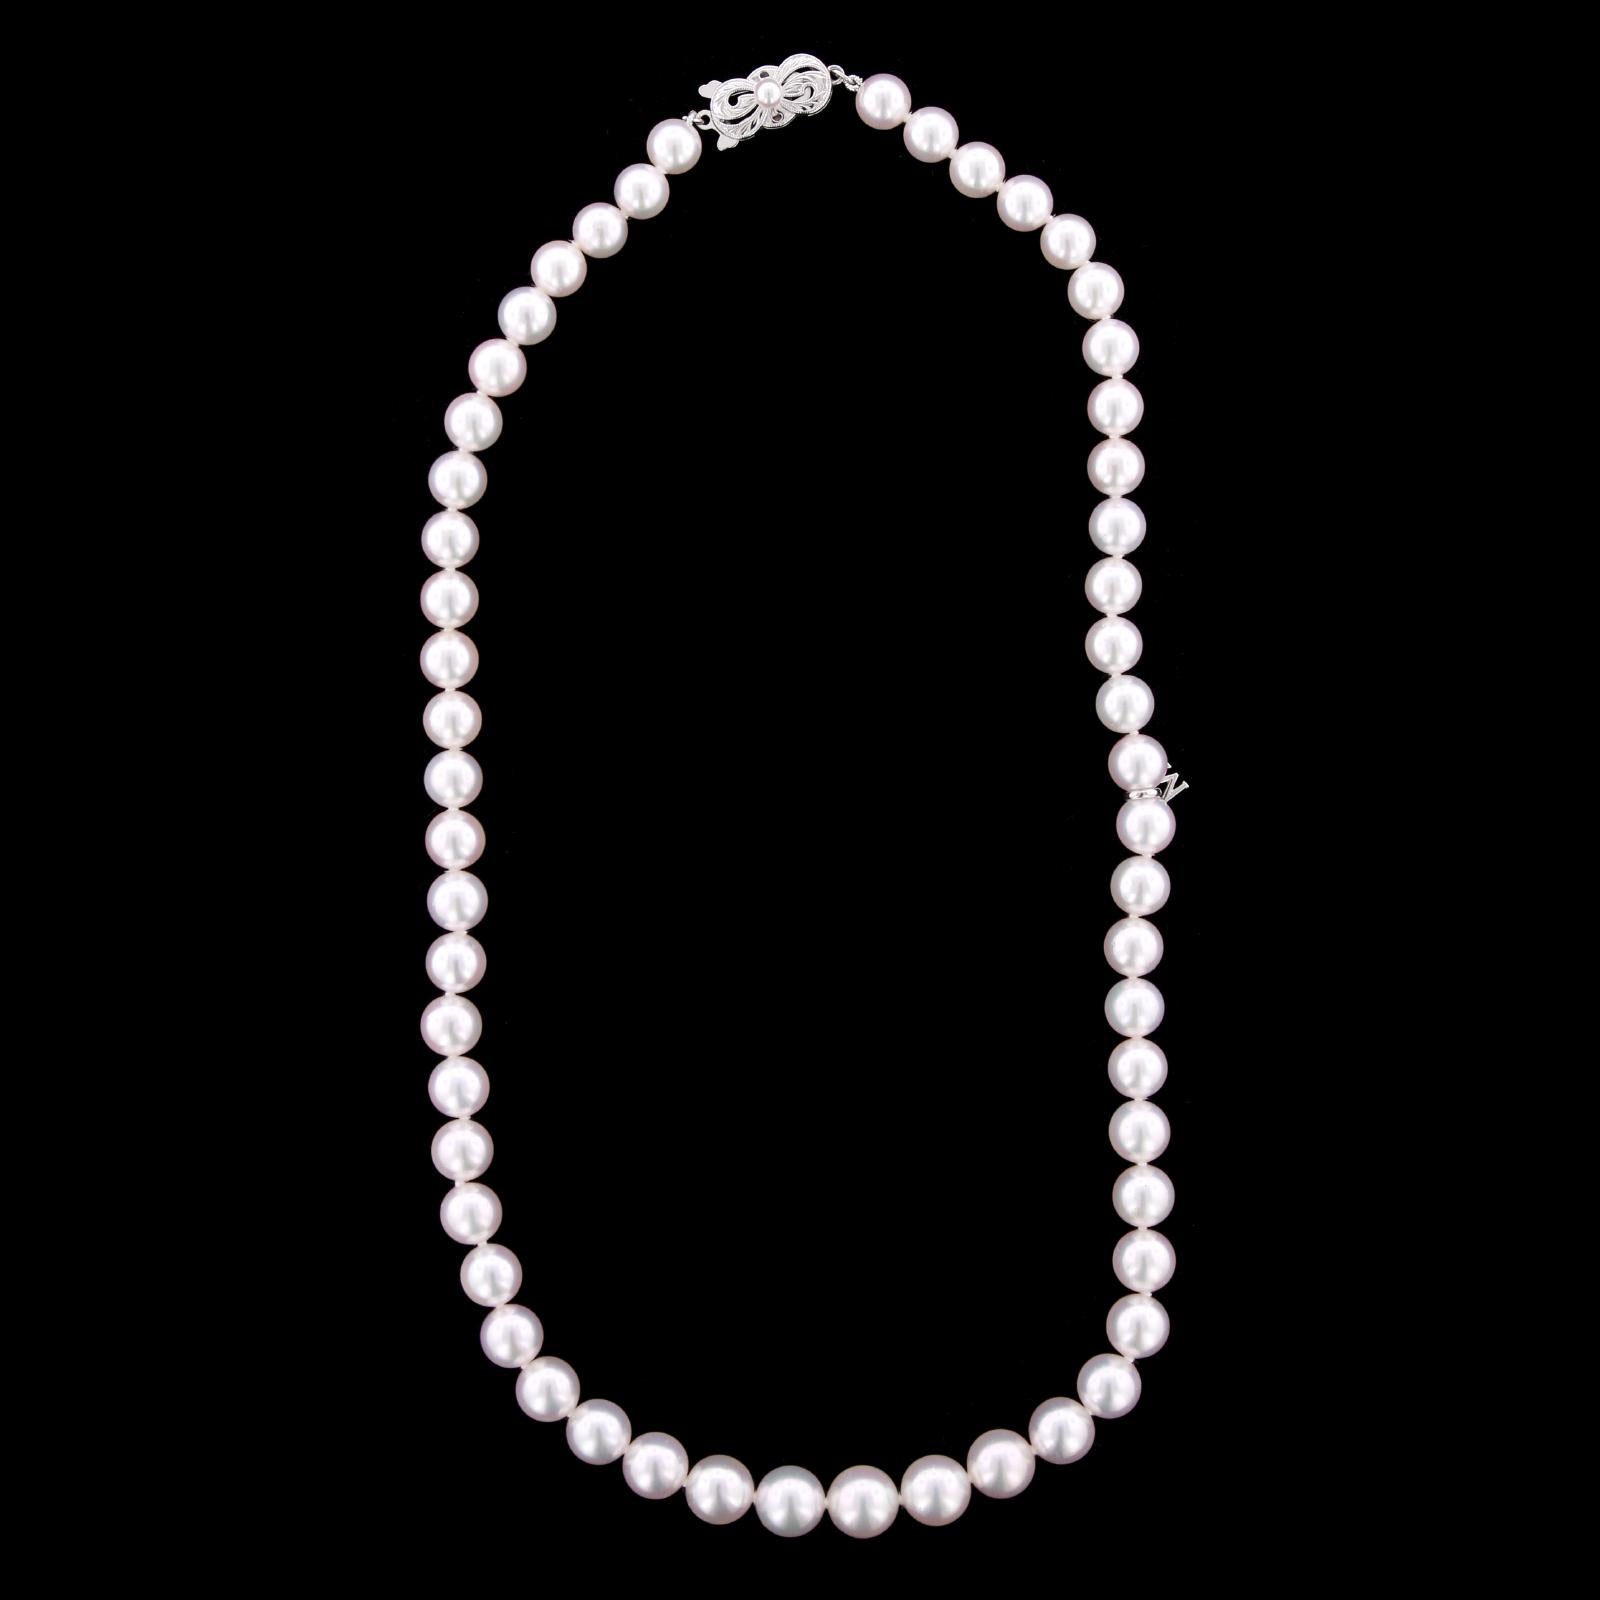 Mikimoto Cultured Pearl Necklace. The necklace is comprised of 55 cultured
pearls graduating in size from 7.00 to 9.00mm., completed by a signature 18K
white gold clasp set with a cultured pearl, length 18